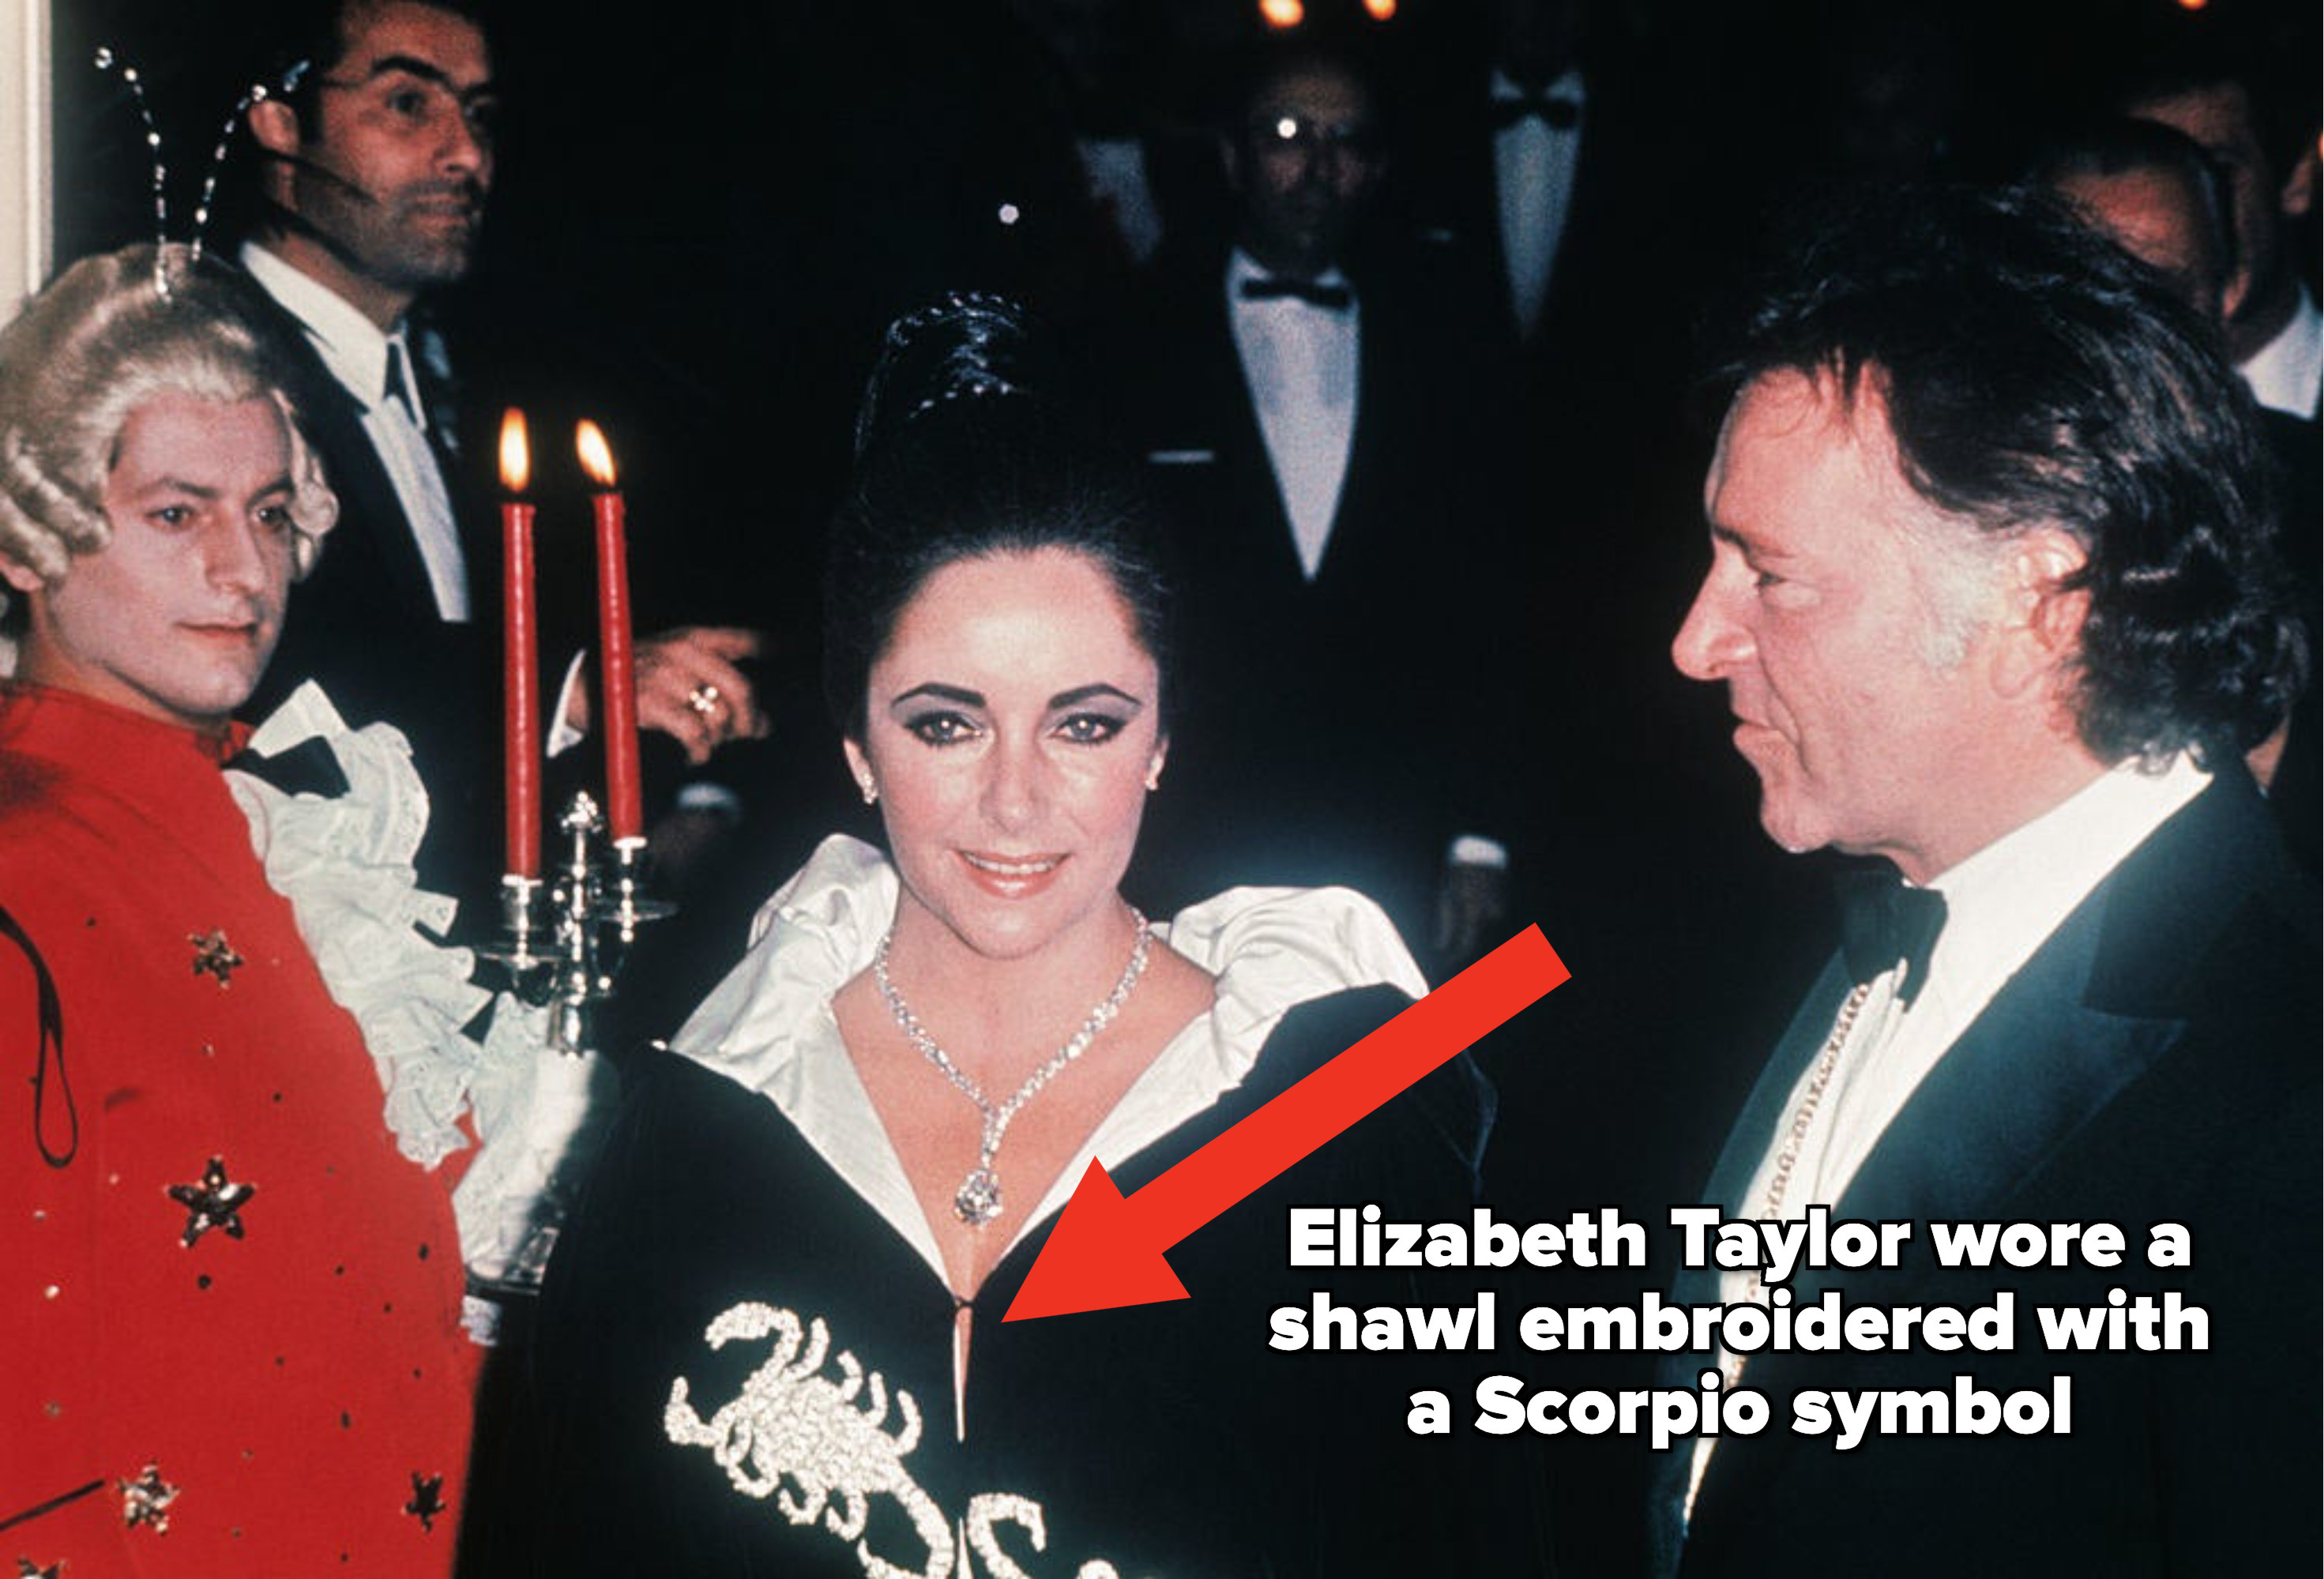 arrow pointing to Elizabeth taylor wearing a shawl that was embroidered with a scorpio symbol